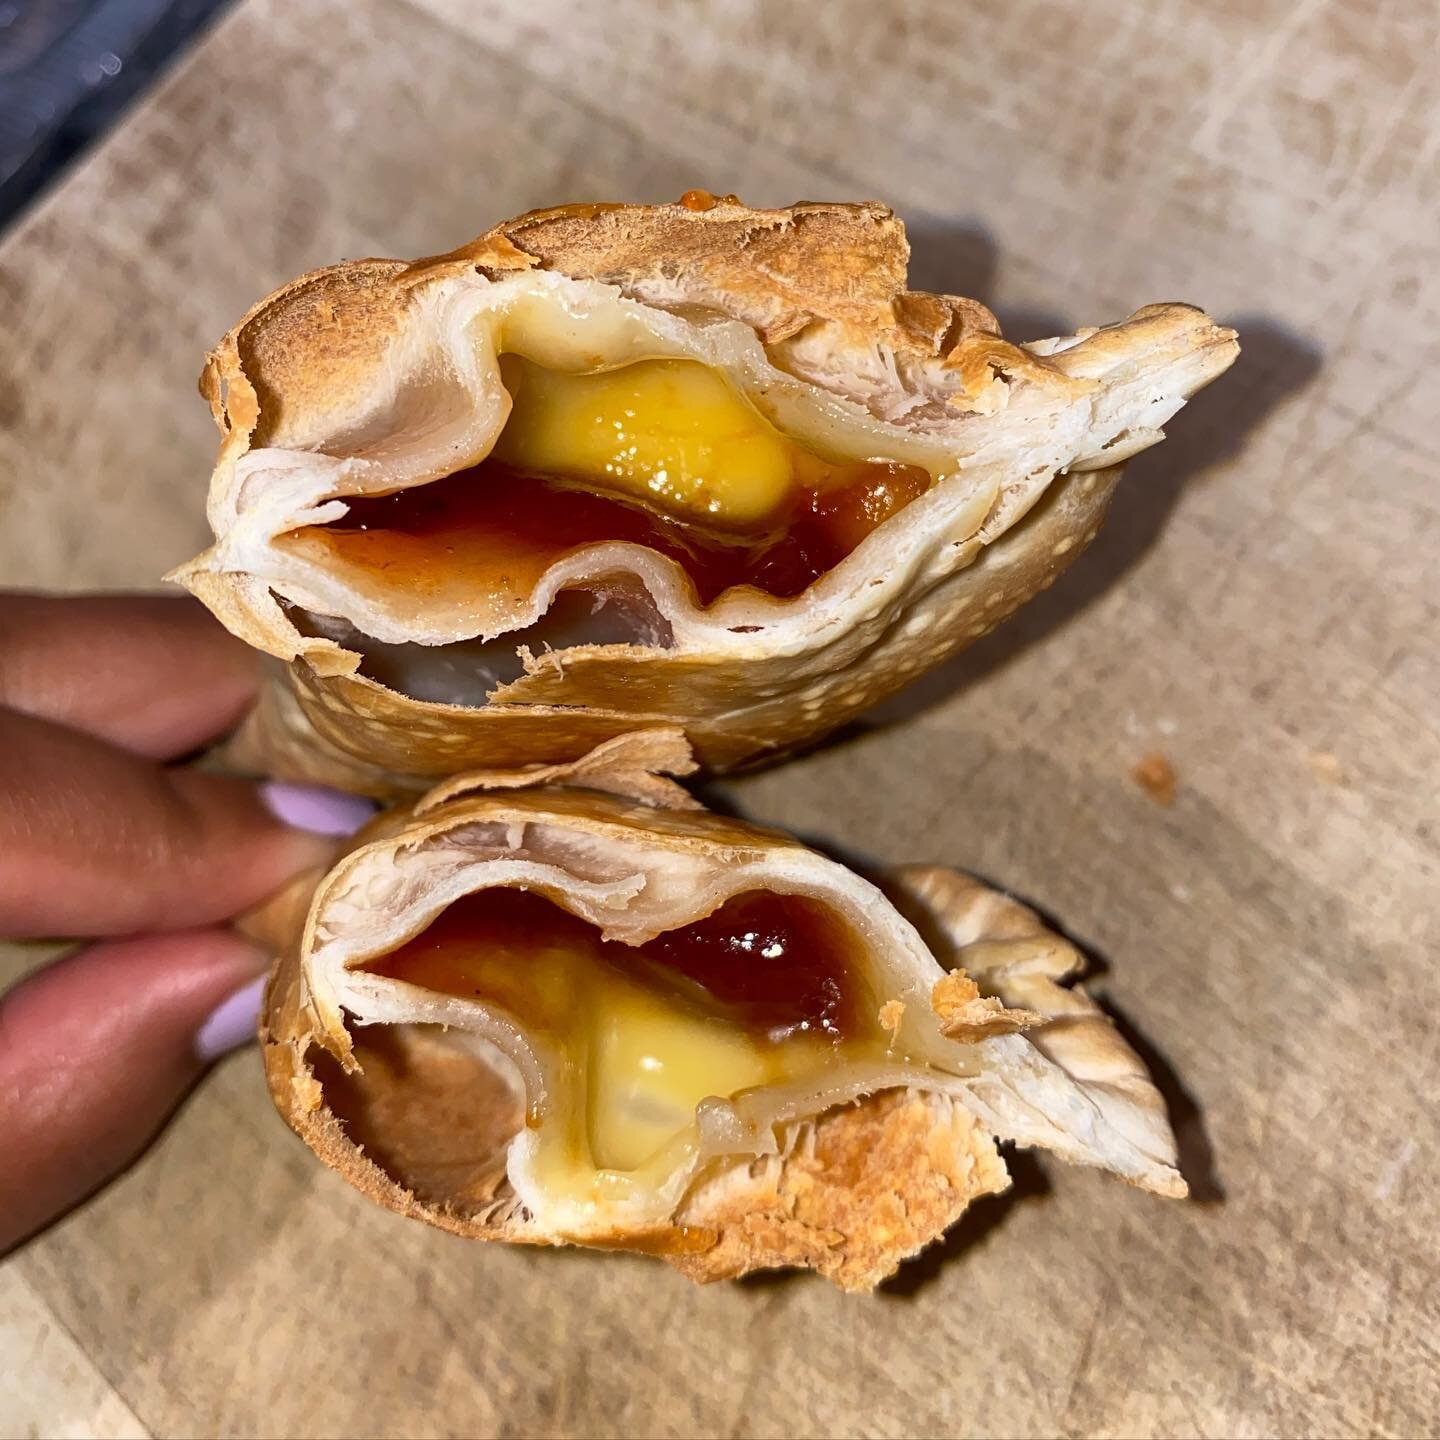 Air fryed cheese and guava pastelitos (The rest of world knows these as &ldquo;empanadas,&rdquo; but in DR we mostly say &ldquo;pastelitos/patelito,&rdquo; and I think that&rsquo;s beautiful.)

Two things before I tell you more:
1. I *finally* found 